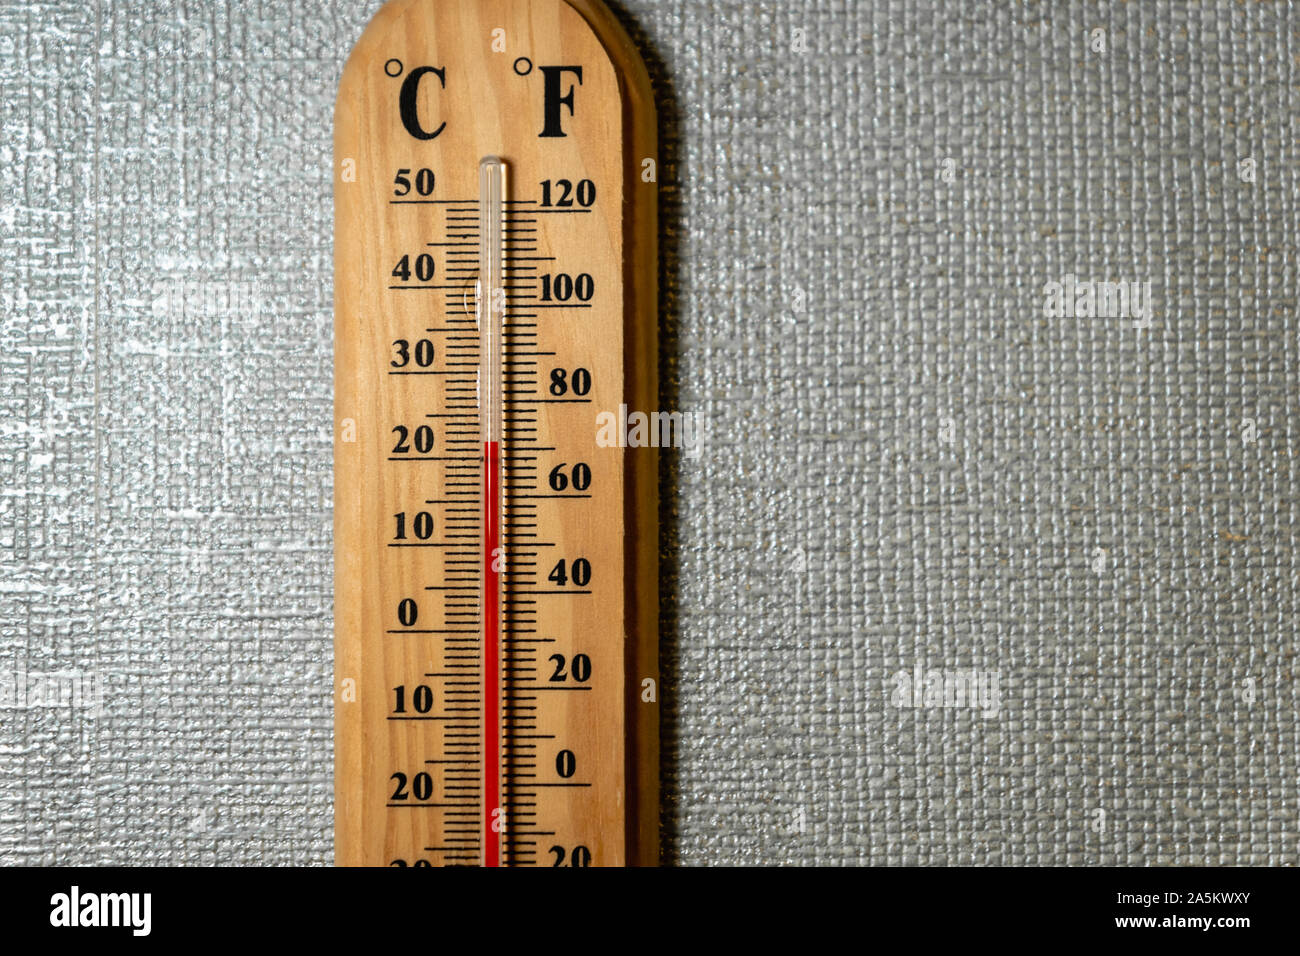 https://c8.alamy.com/comp/2A5KWXY/temperature-gauge-thermometer-on-the-white-wall-analog-temperature-gauge-close-up-2A5KWXY.jpg